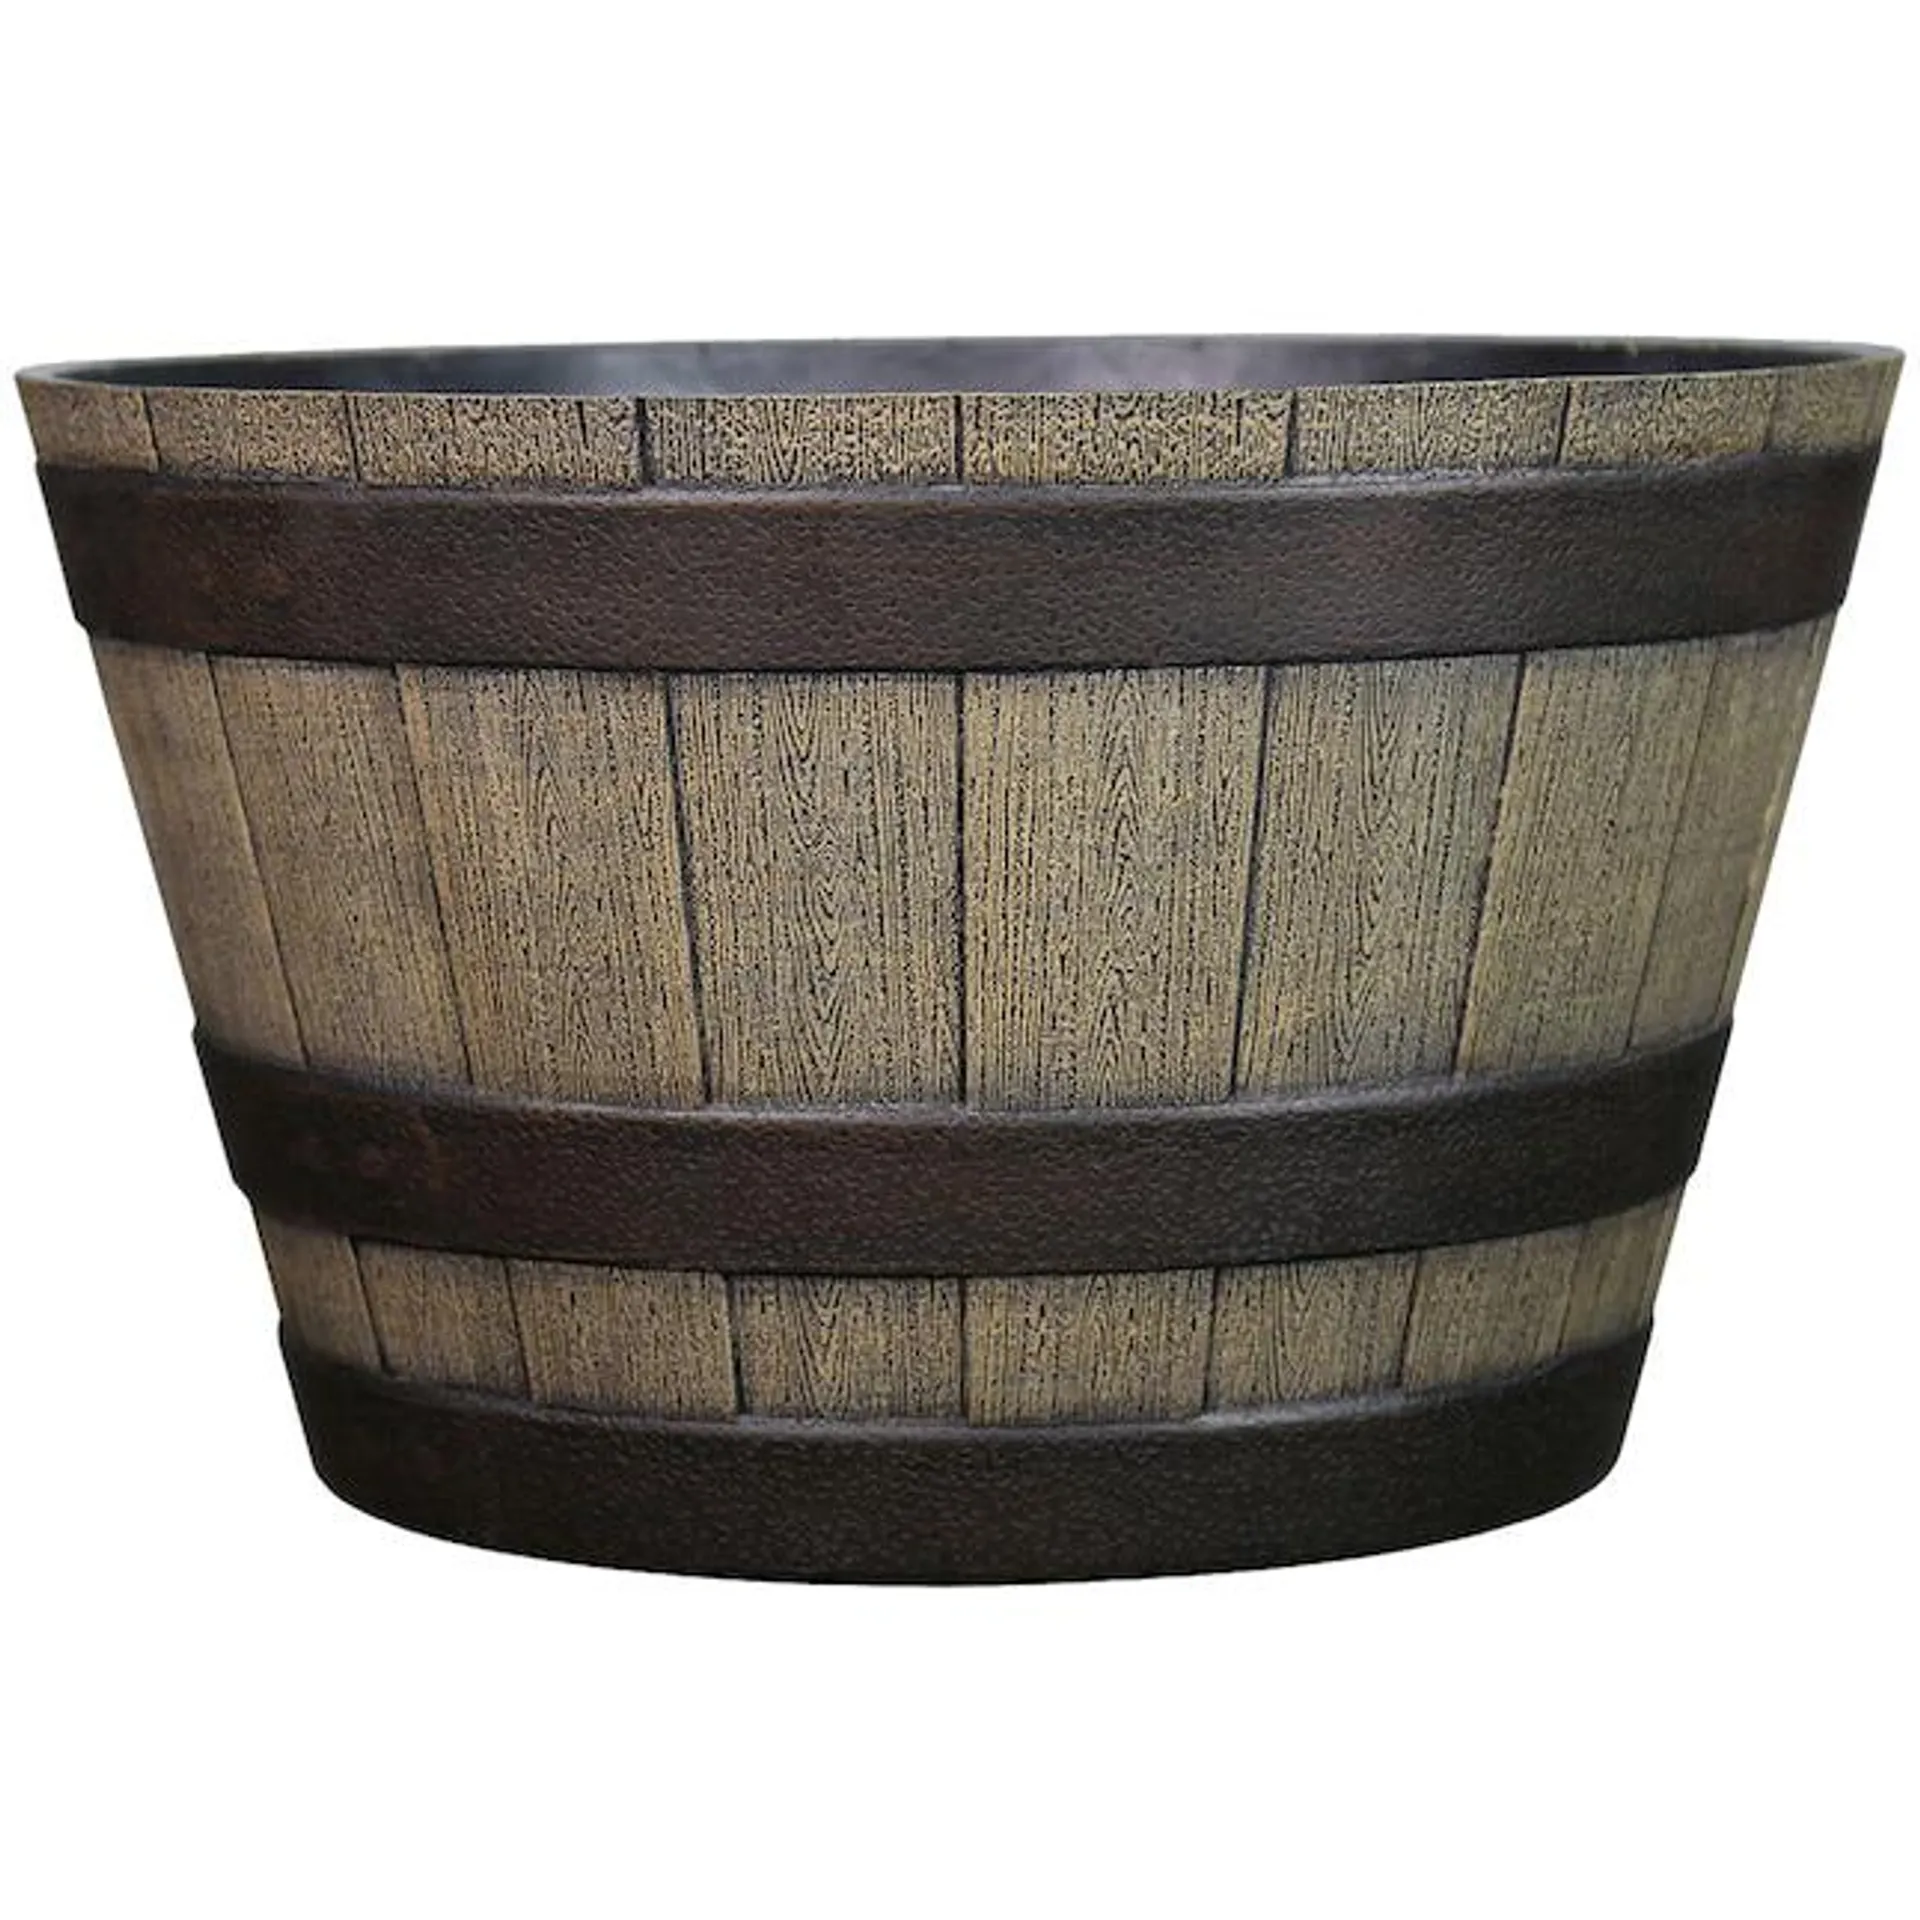 Style Selections 19.3-in W x 12.13-in H Brown Resin Rustic Indoor/Outdoor Planter